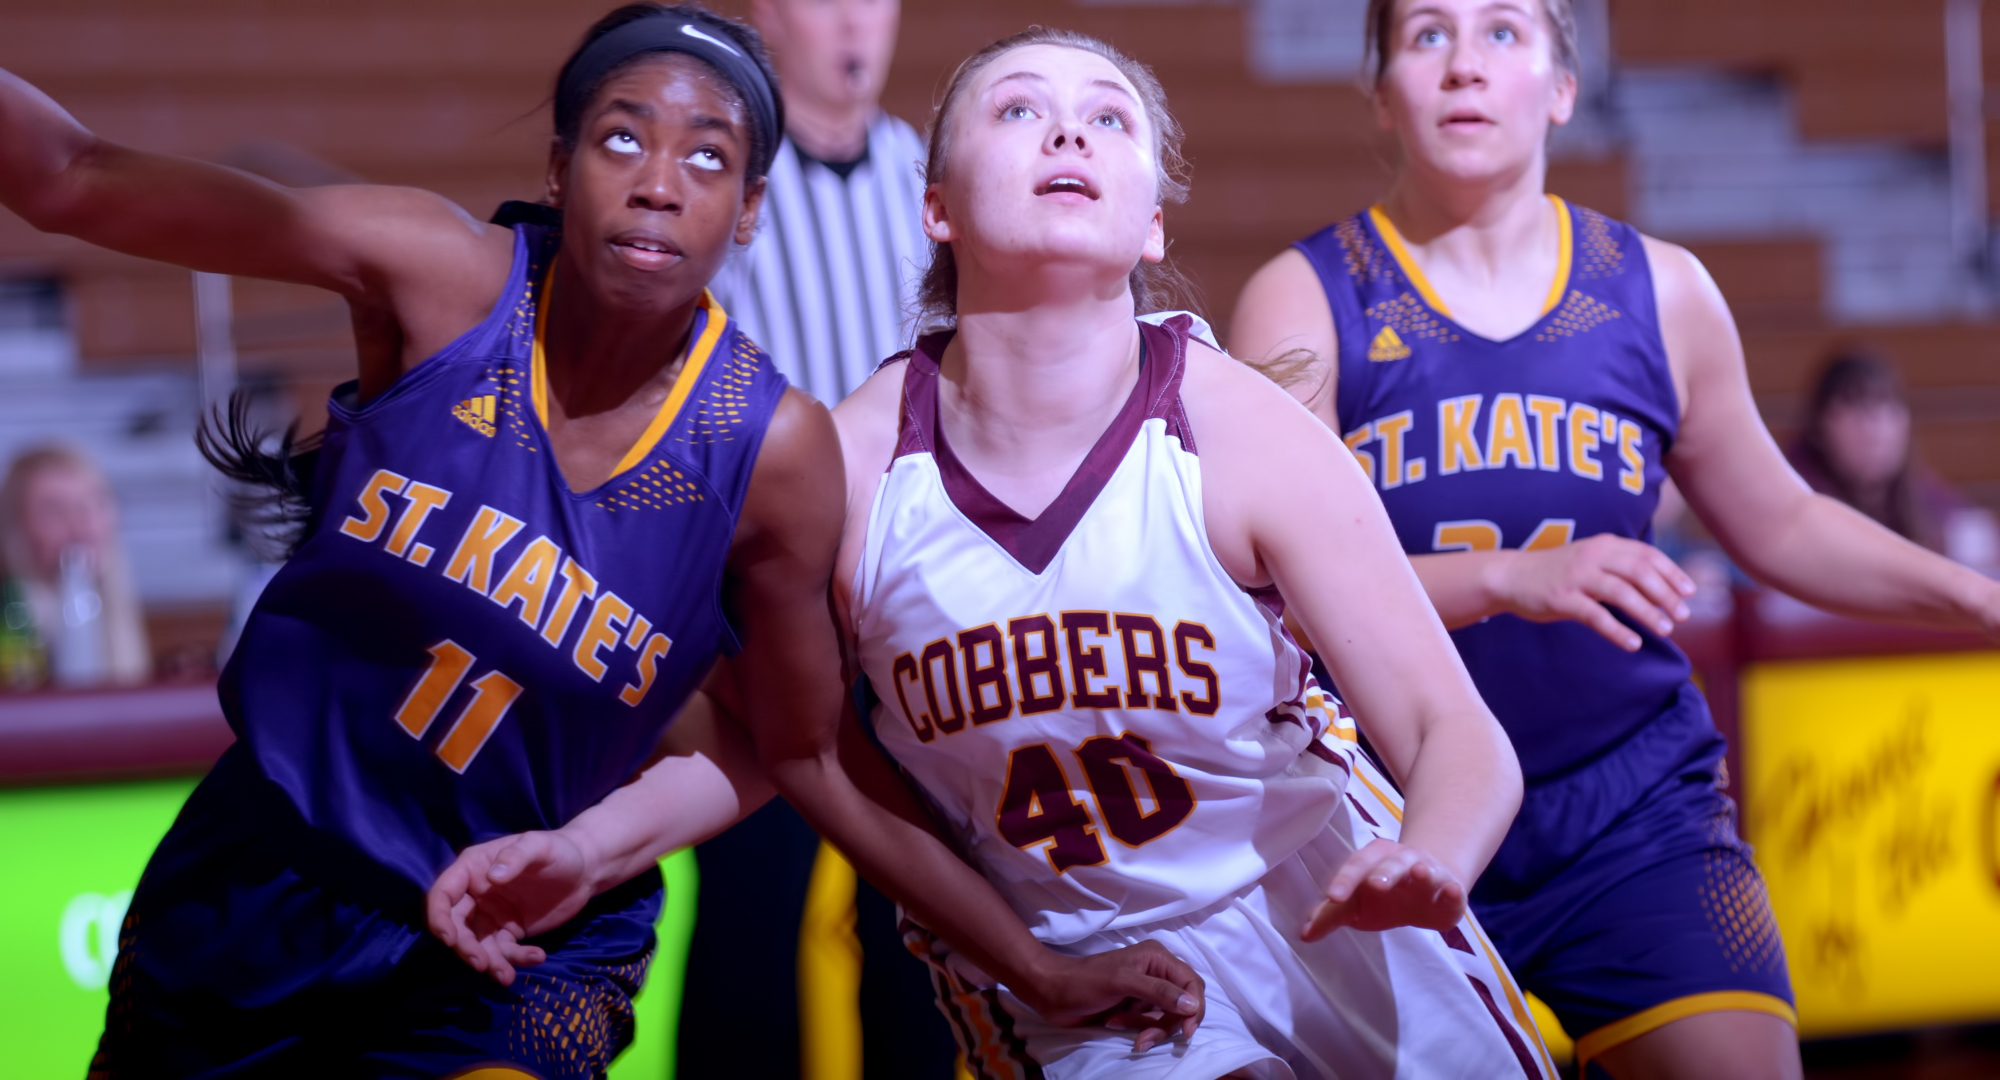 Sophomore Mira Ellefson had a game-high 14 points and helped the Cobbers beat St. Olaf 65-46 in Northfield.